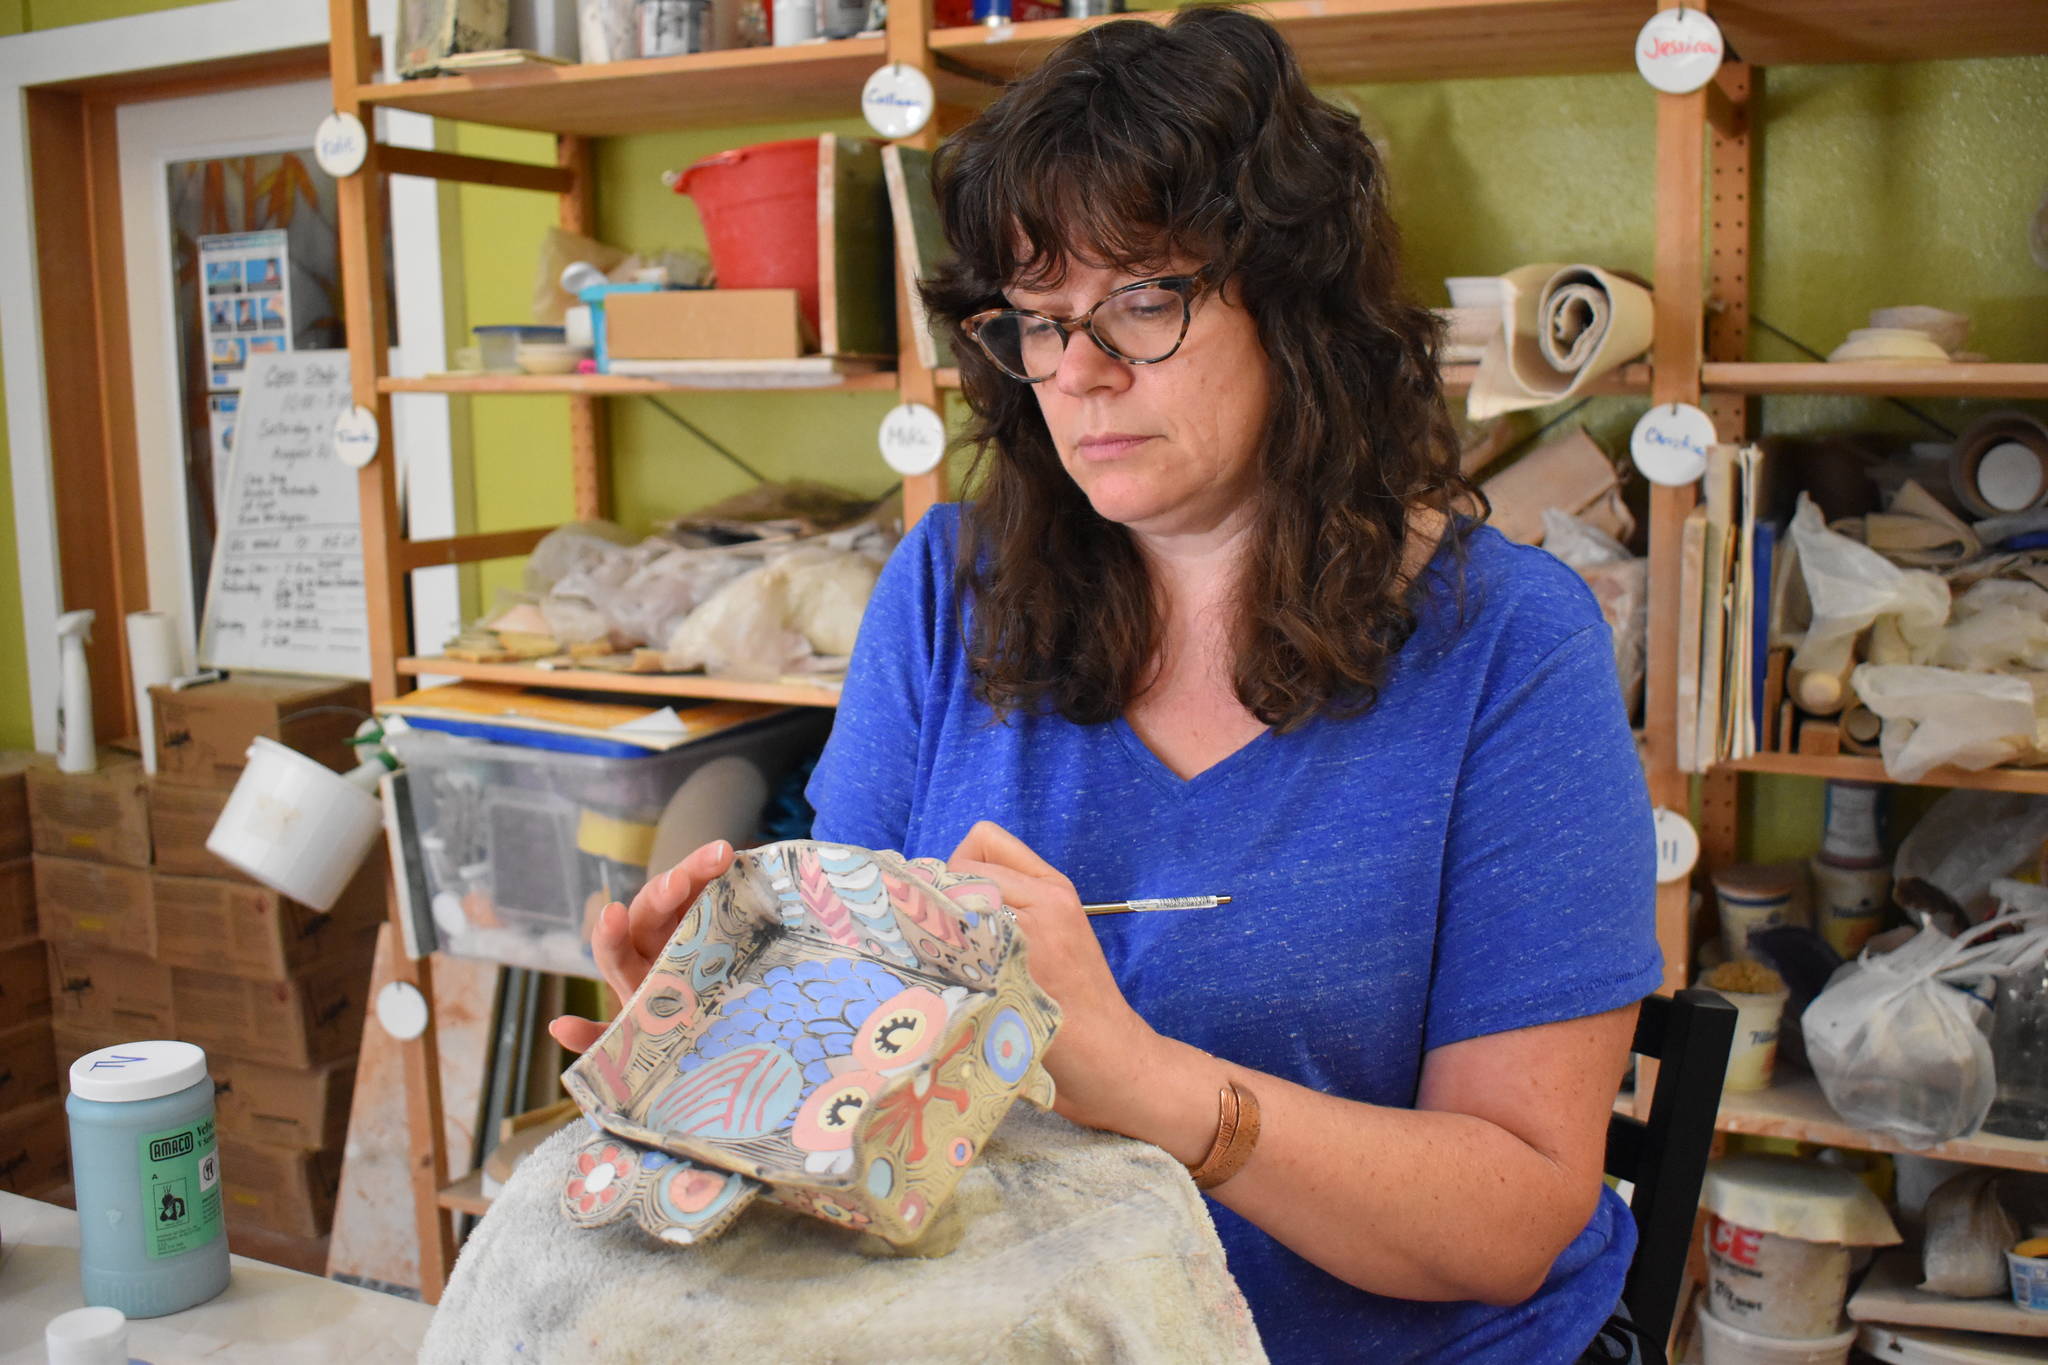 Tricia Vanslageren glazes some of her artwork at Whidbey Clay Center in Freeland. She will be showing her pieces there along with three other artists during the Whidbey Working Artists Summer Open Studio Tour this weekend. (Photo by Emily Gilbert/Whidbey News-Times)